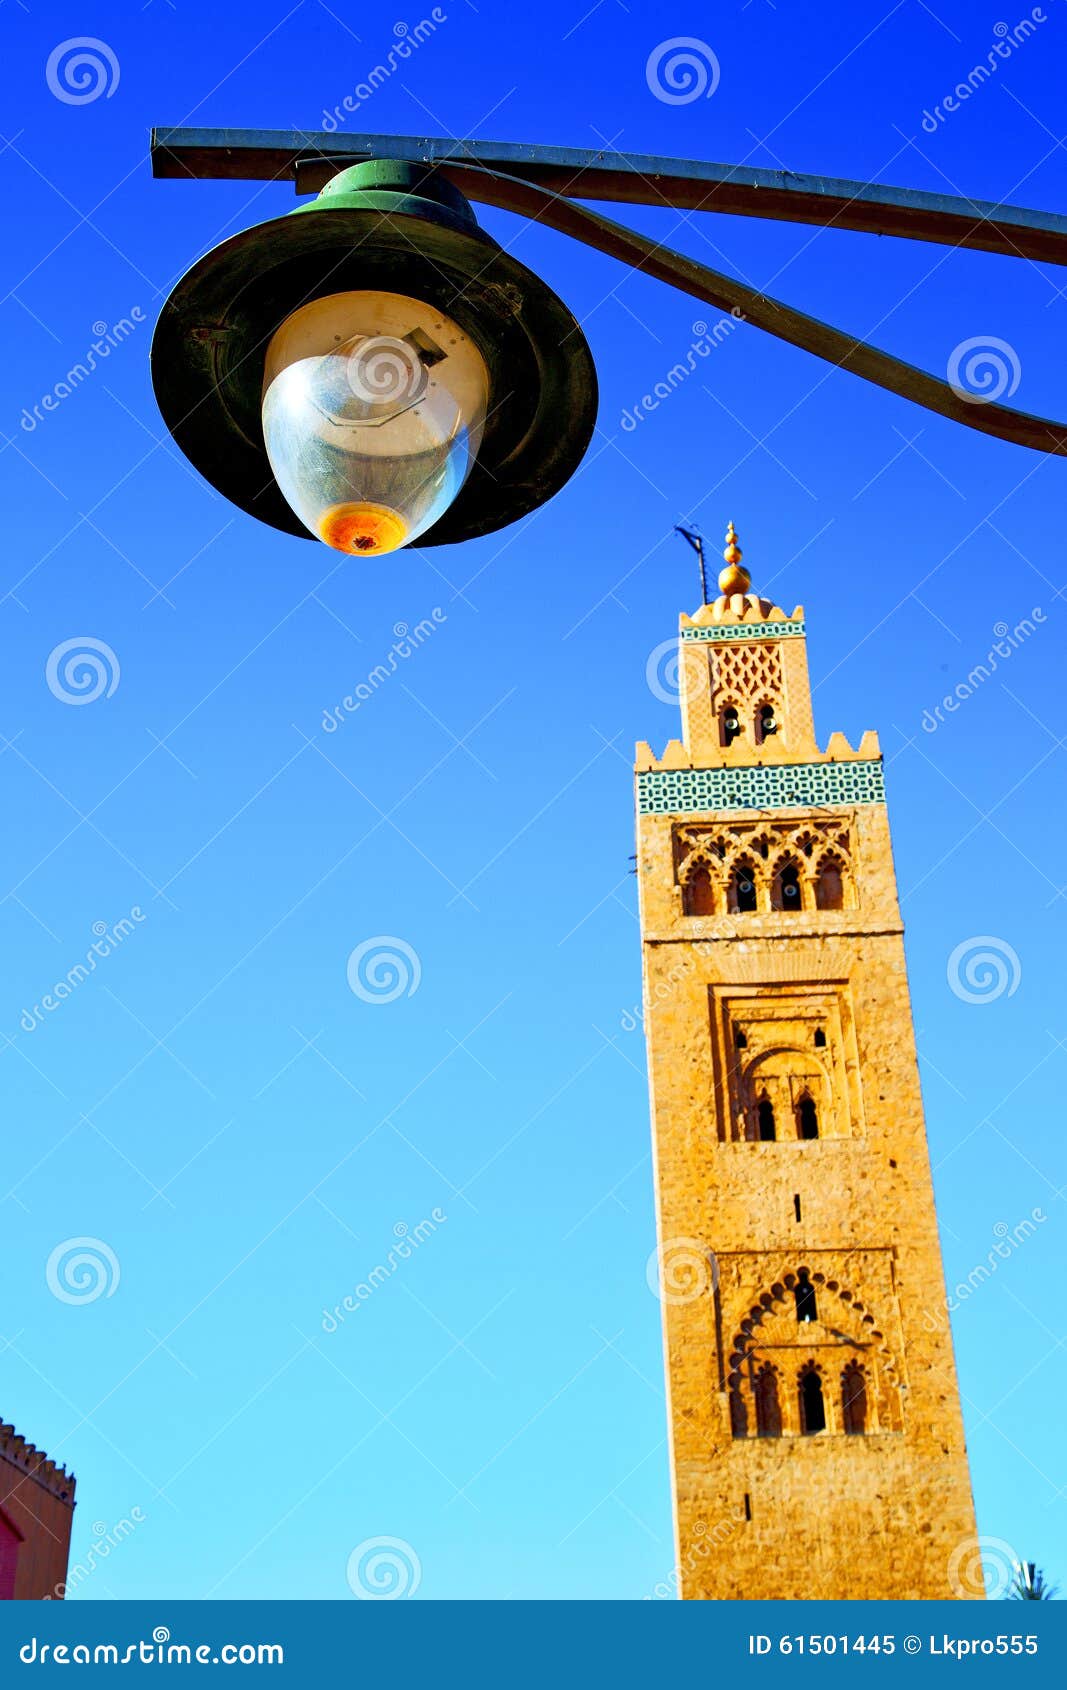 History In Maroc Africa Street Lamp Blue Sky Stock Image - Image of